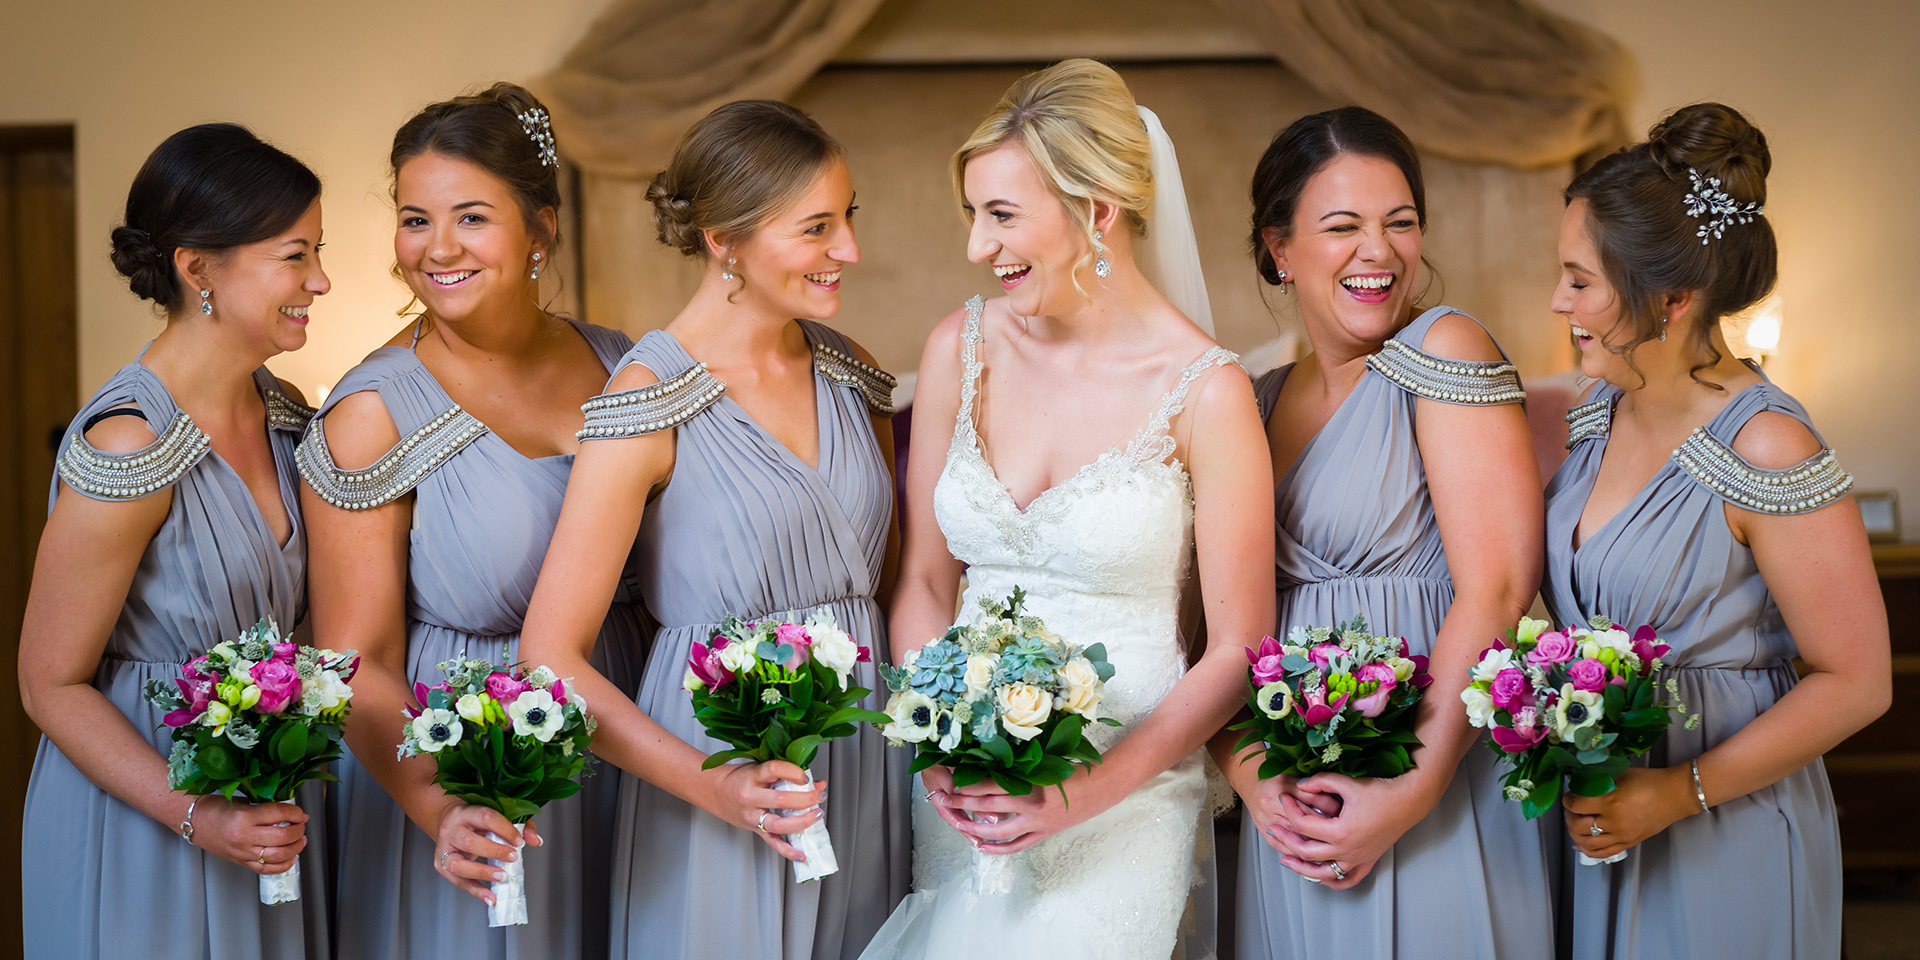 A bride and her bridesmaids ready for a stunning wedding in the beautiful barn venue Rivervale Barn